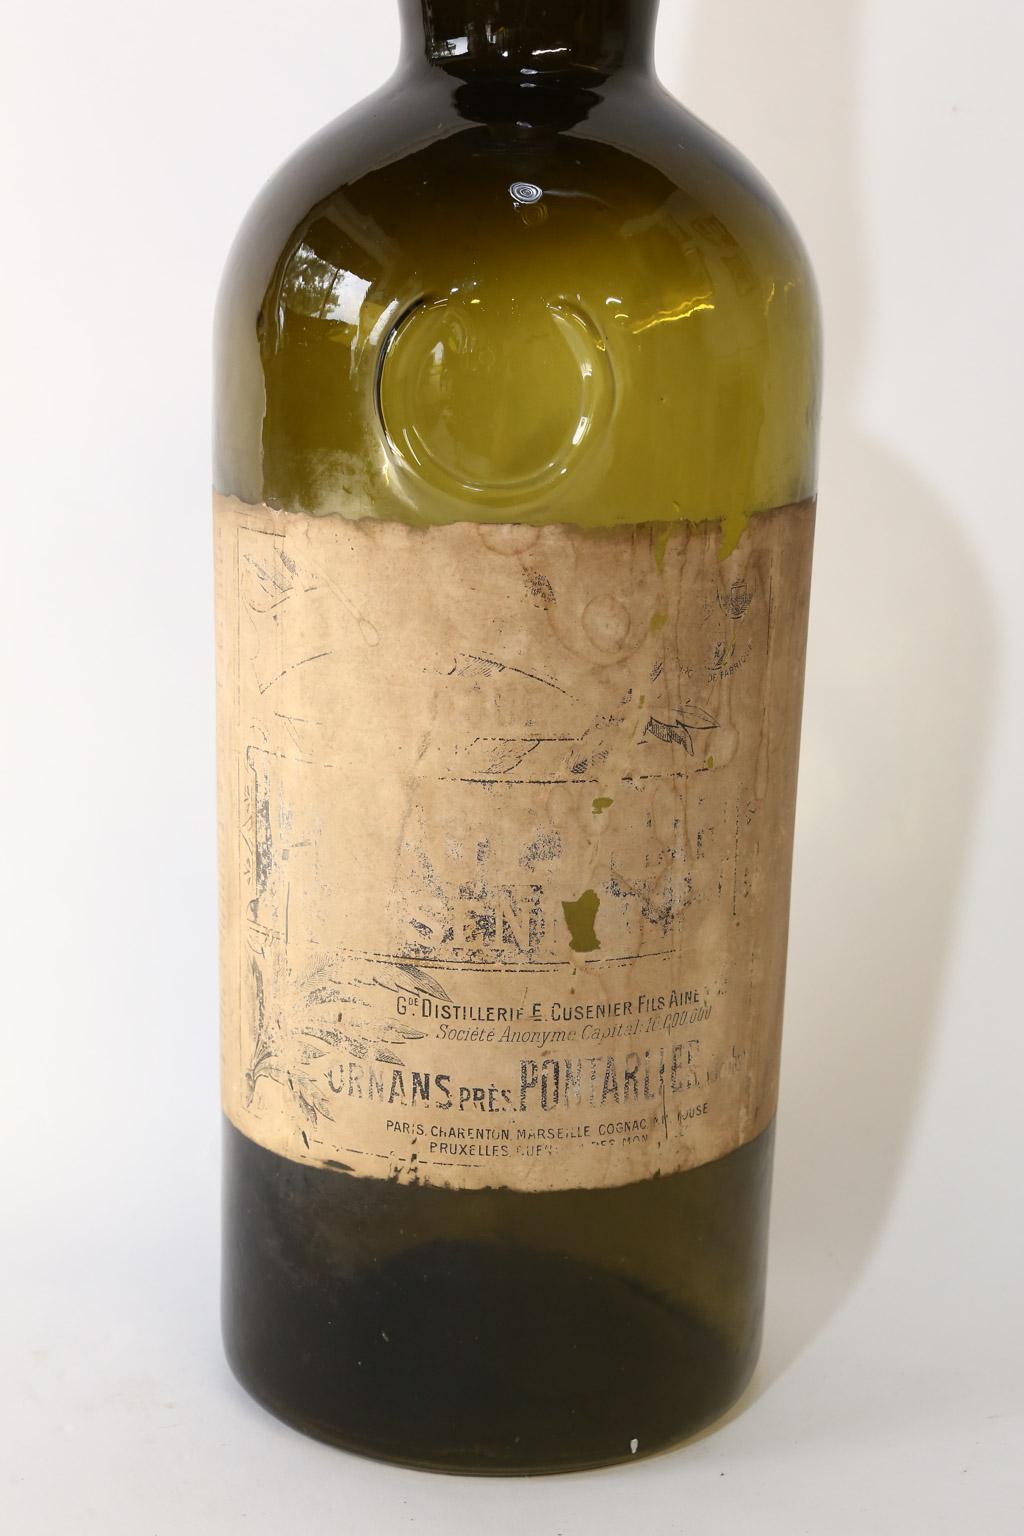 This beautiful large French wine bottle was probably once used as a display or advertising piece. The paper label is worn and aged in places but does read: Gde. Distillerie E. Cusenier Fils Aine, Societe Anonyme Capital 10.000.000, Ornans Pres